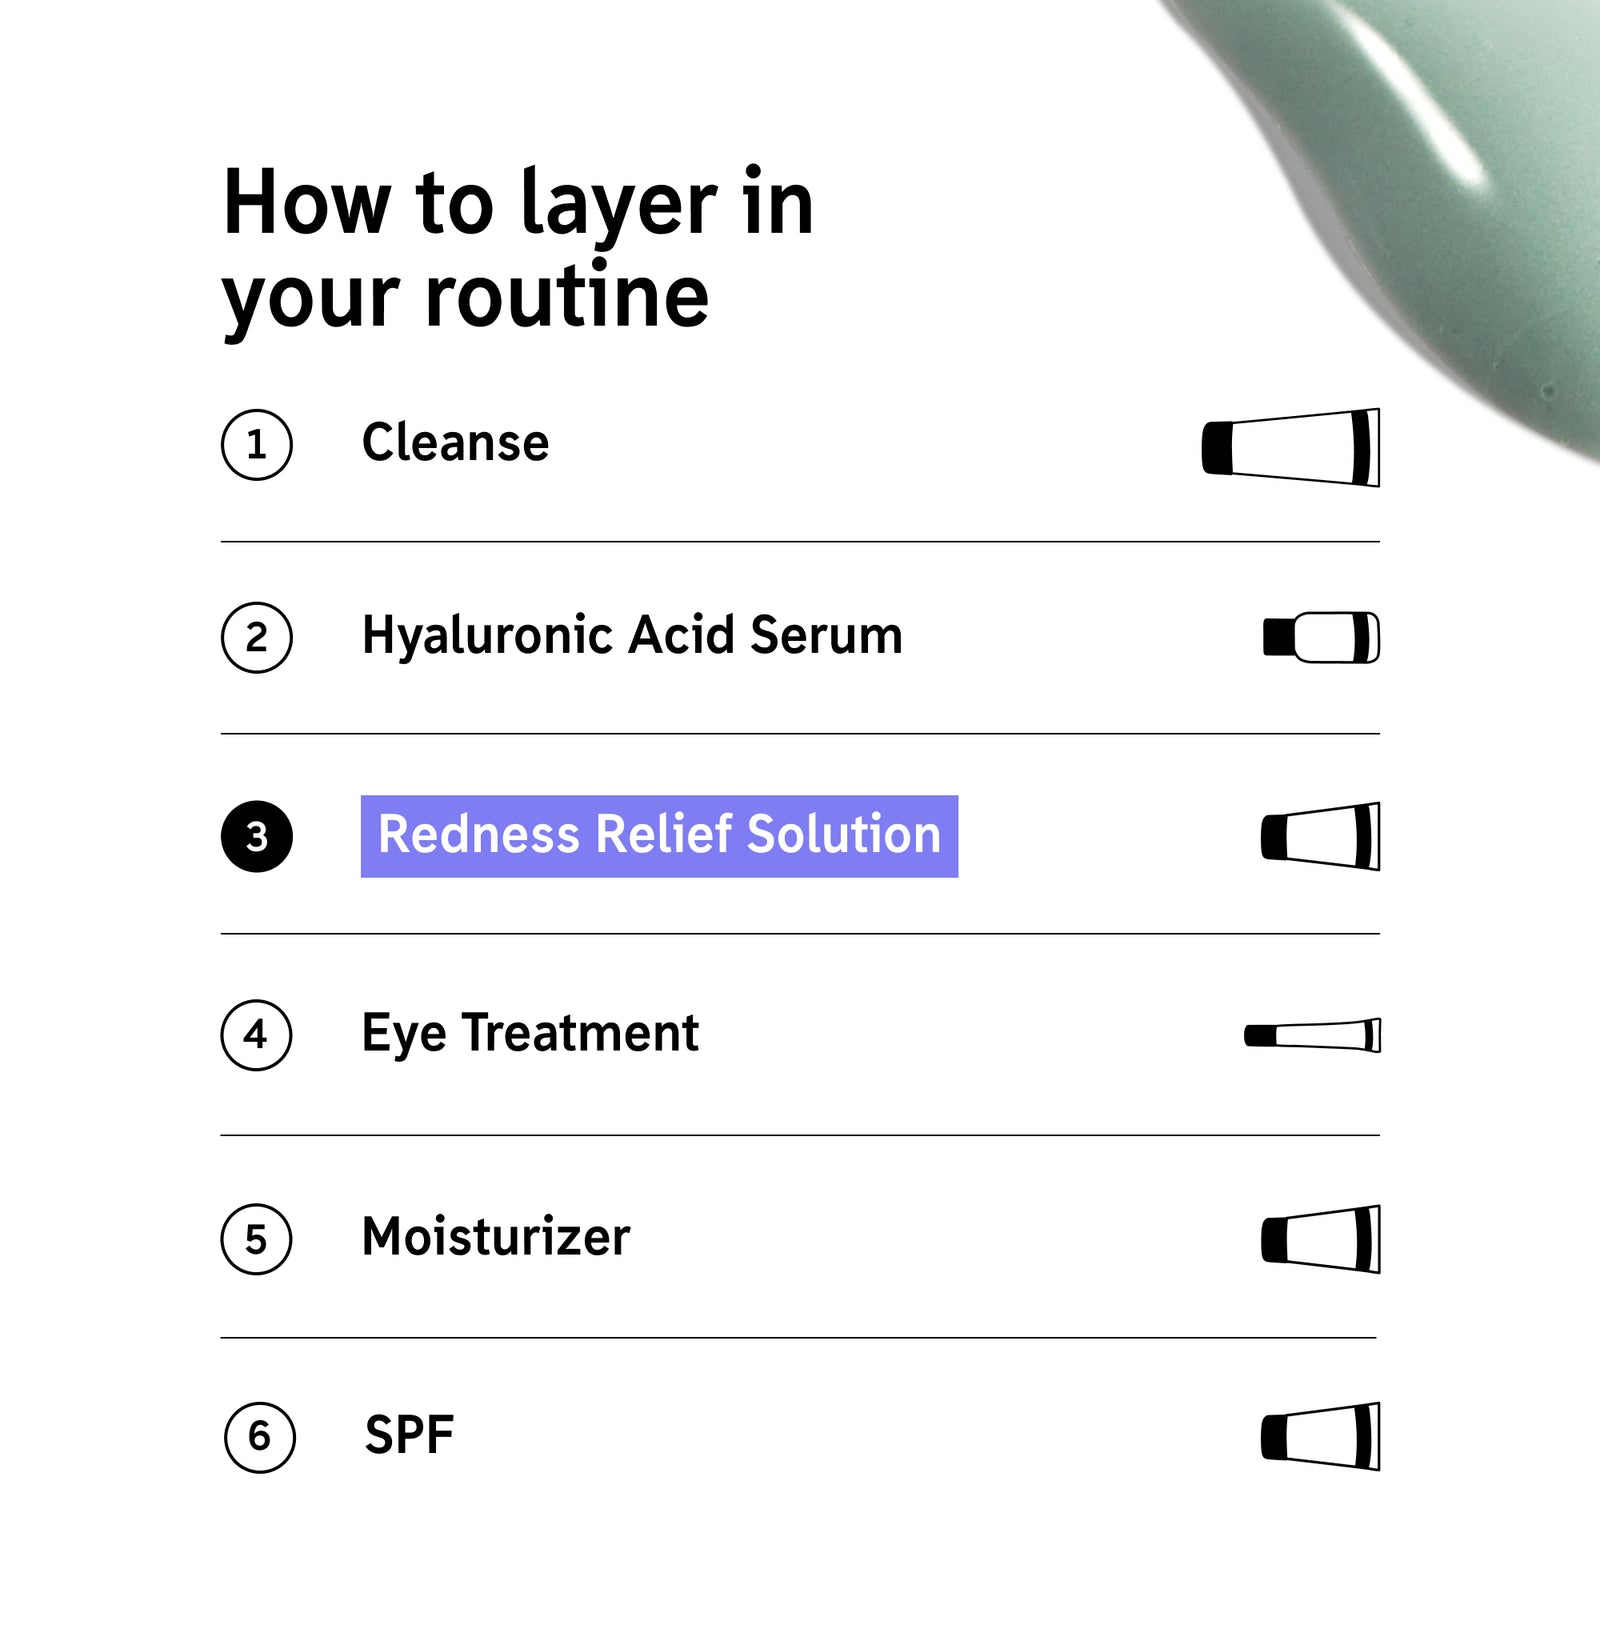 How to layer Redness Relief Solution in your routine